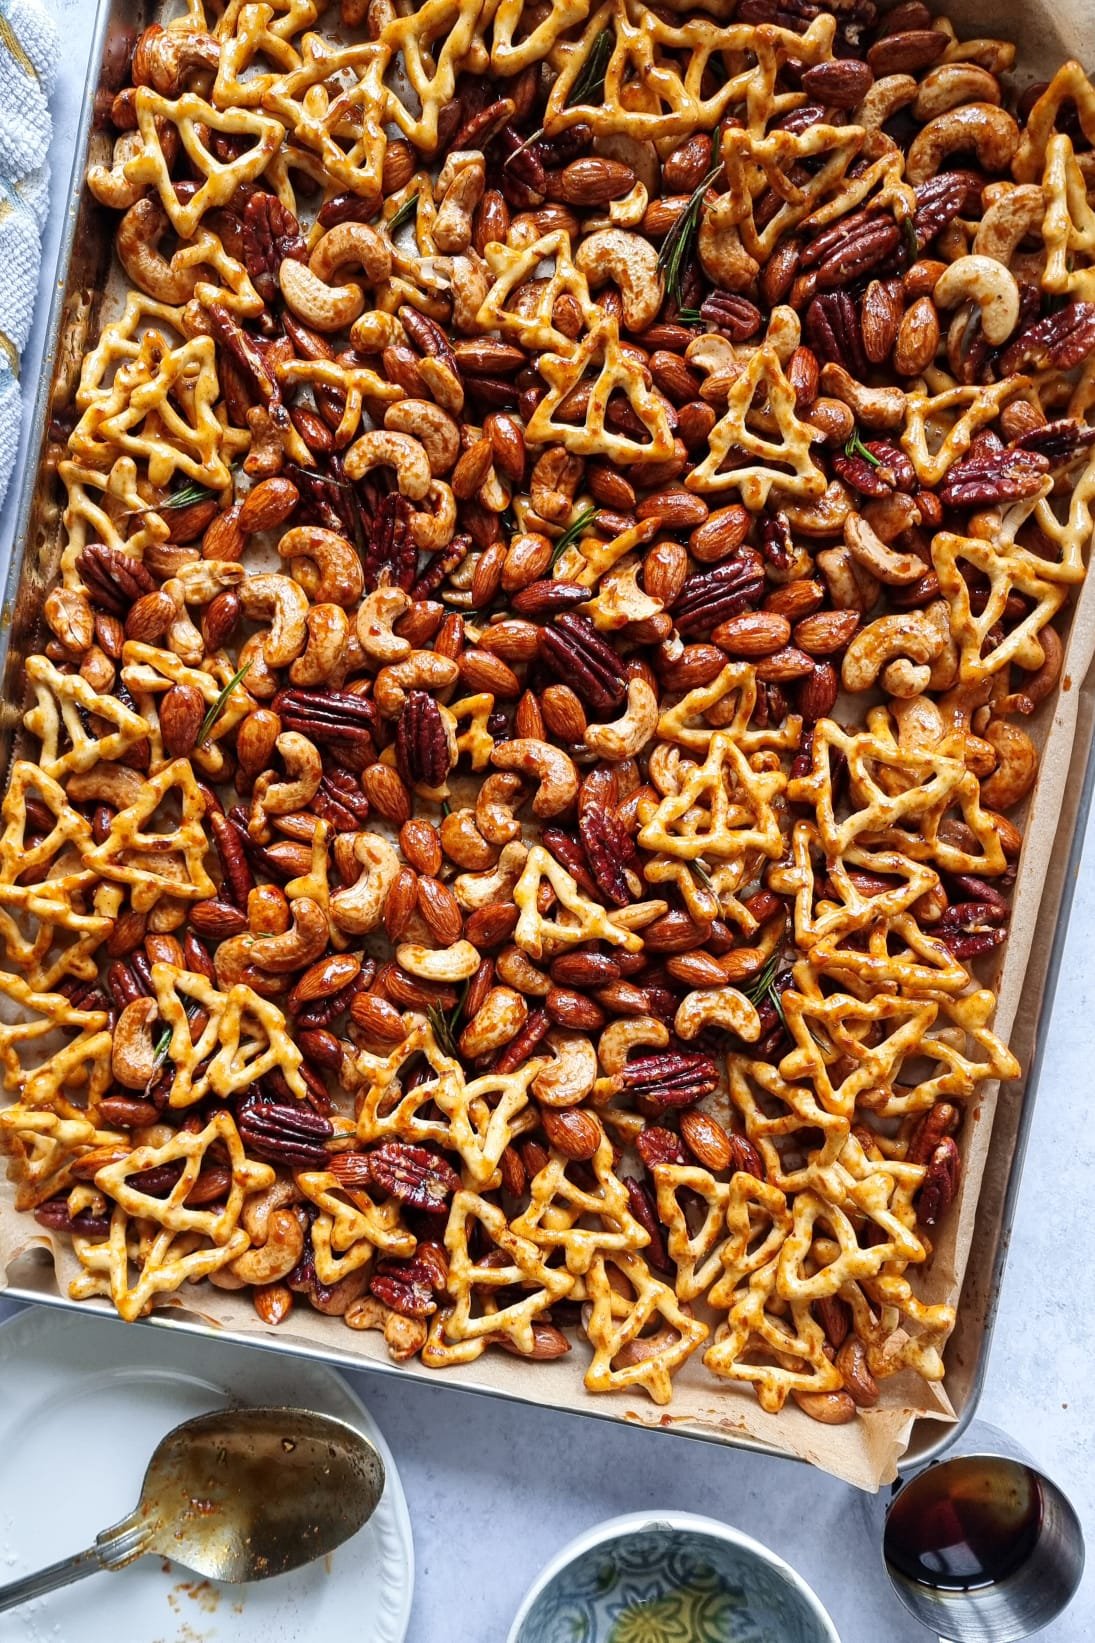 Your very own Sweet and Savoury Spiced Nuts And Pretzels